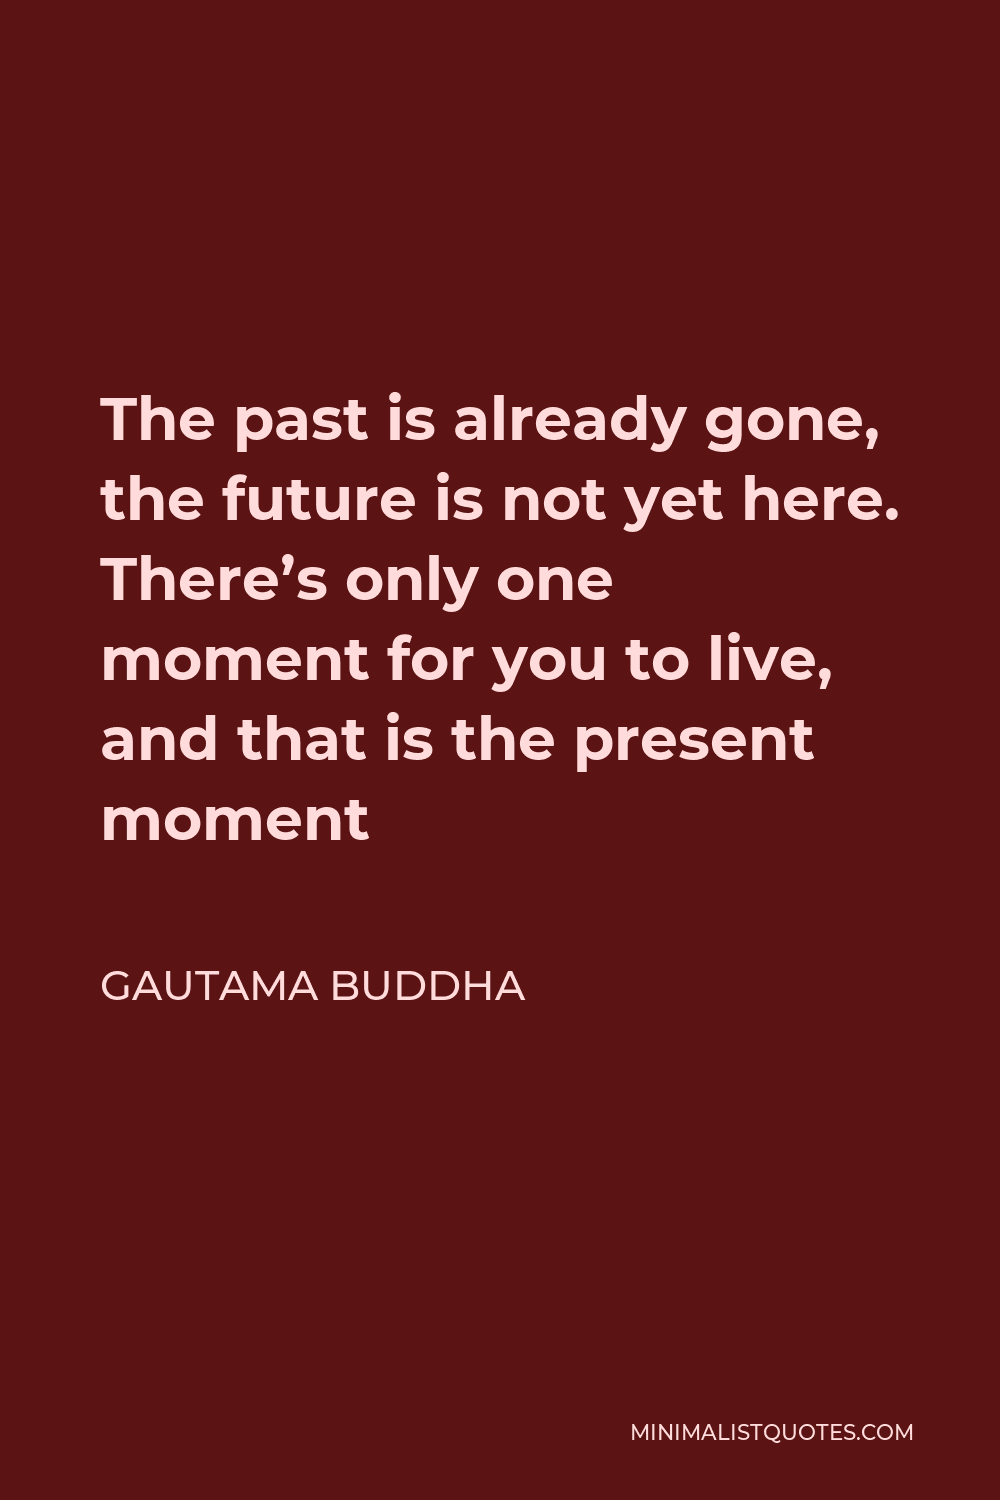 Gautama Buddha Quote - The past is already gone, the future is not yet here. There’s only one moment for you to live, and that is the present moment